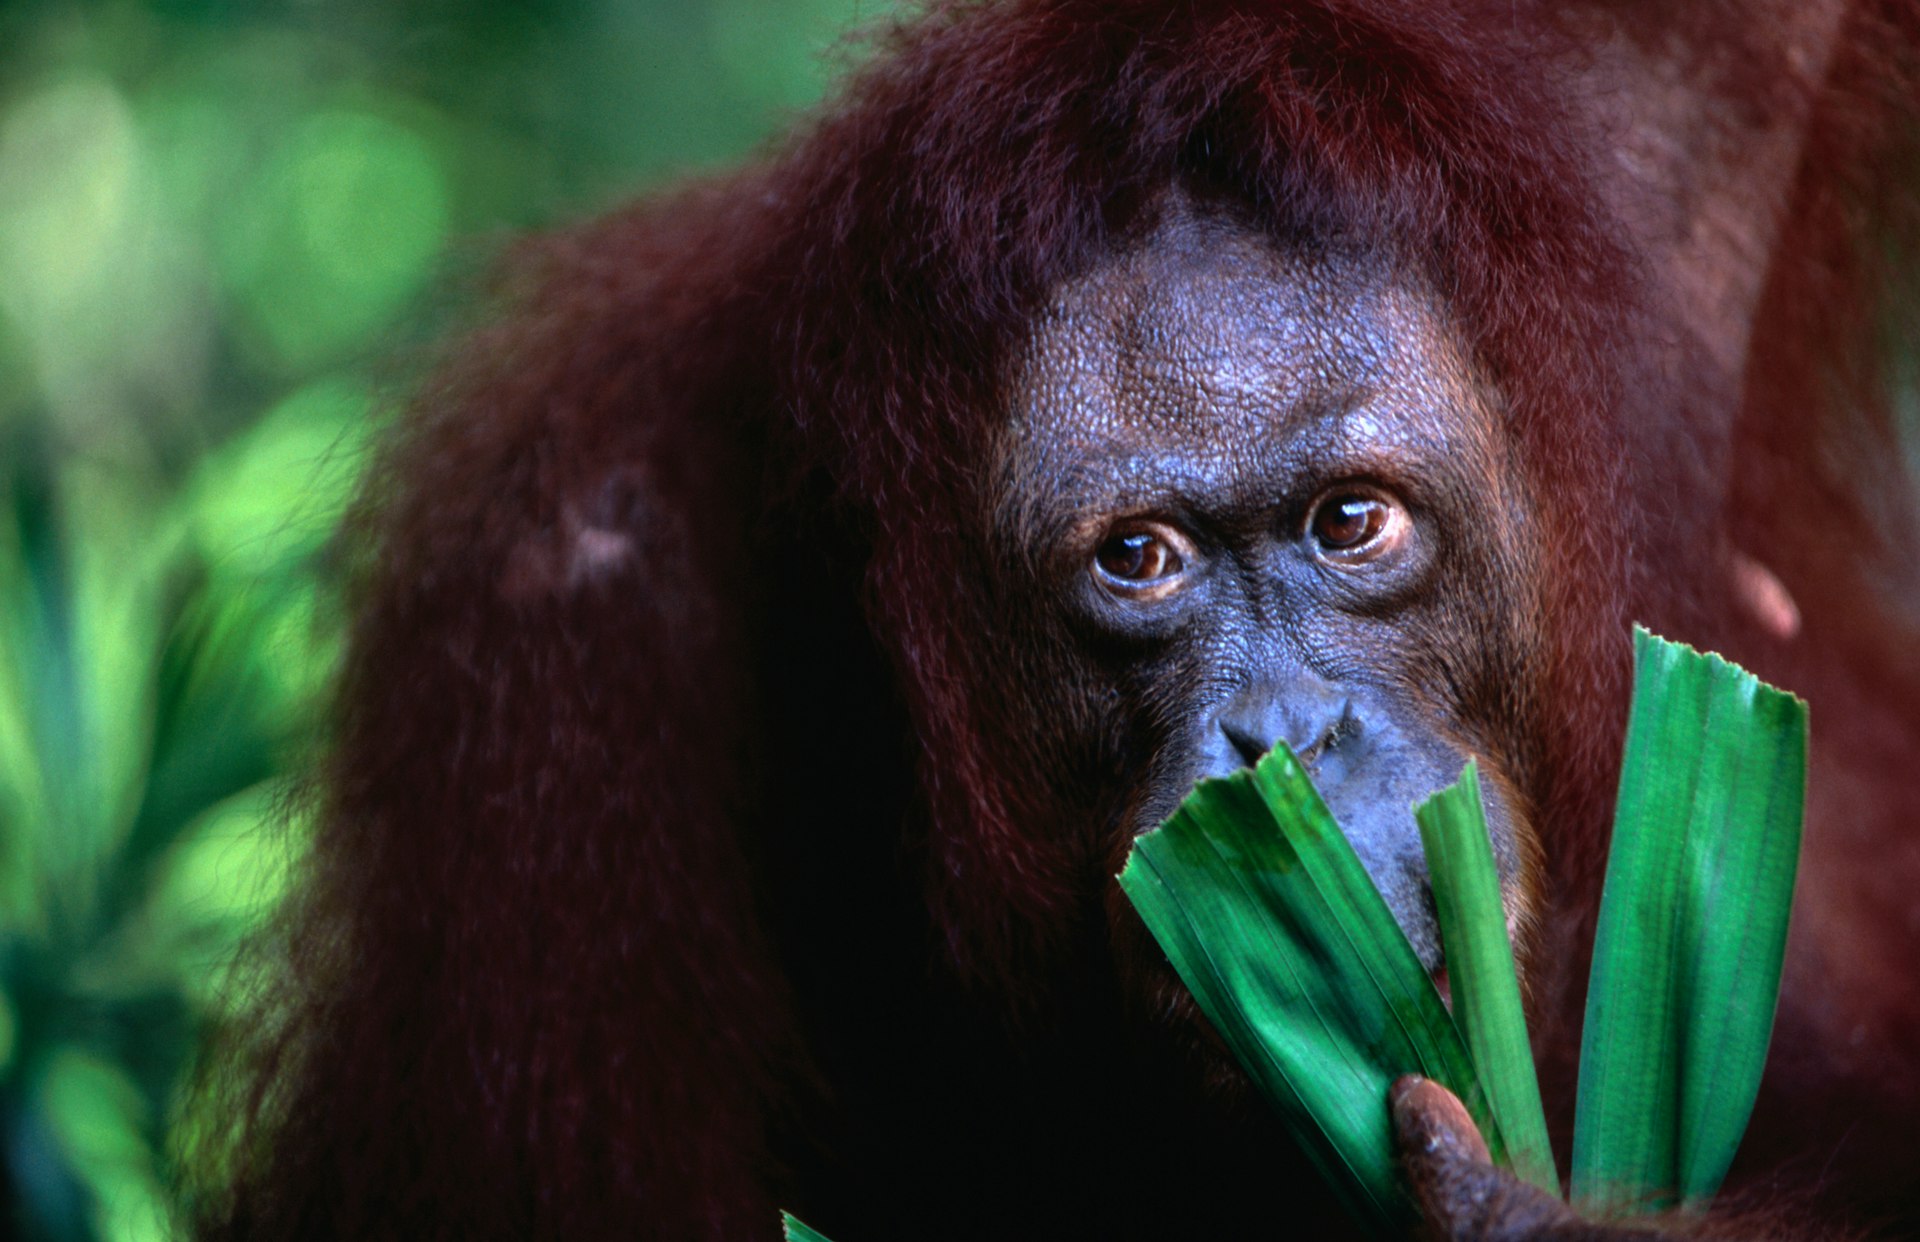 An orangutan eats green shoots while looking off to the side of the camera